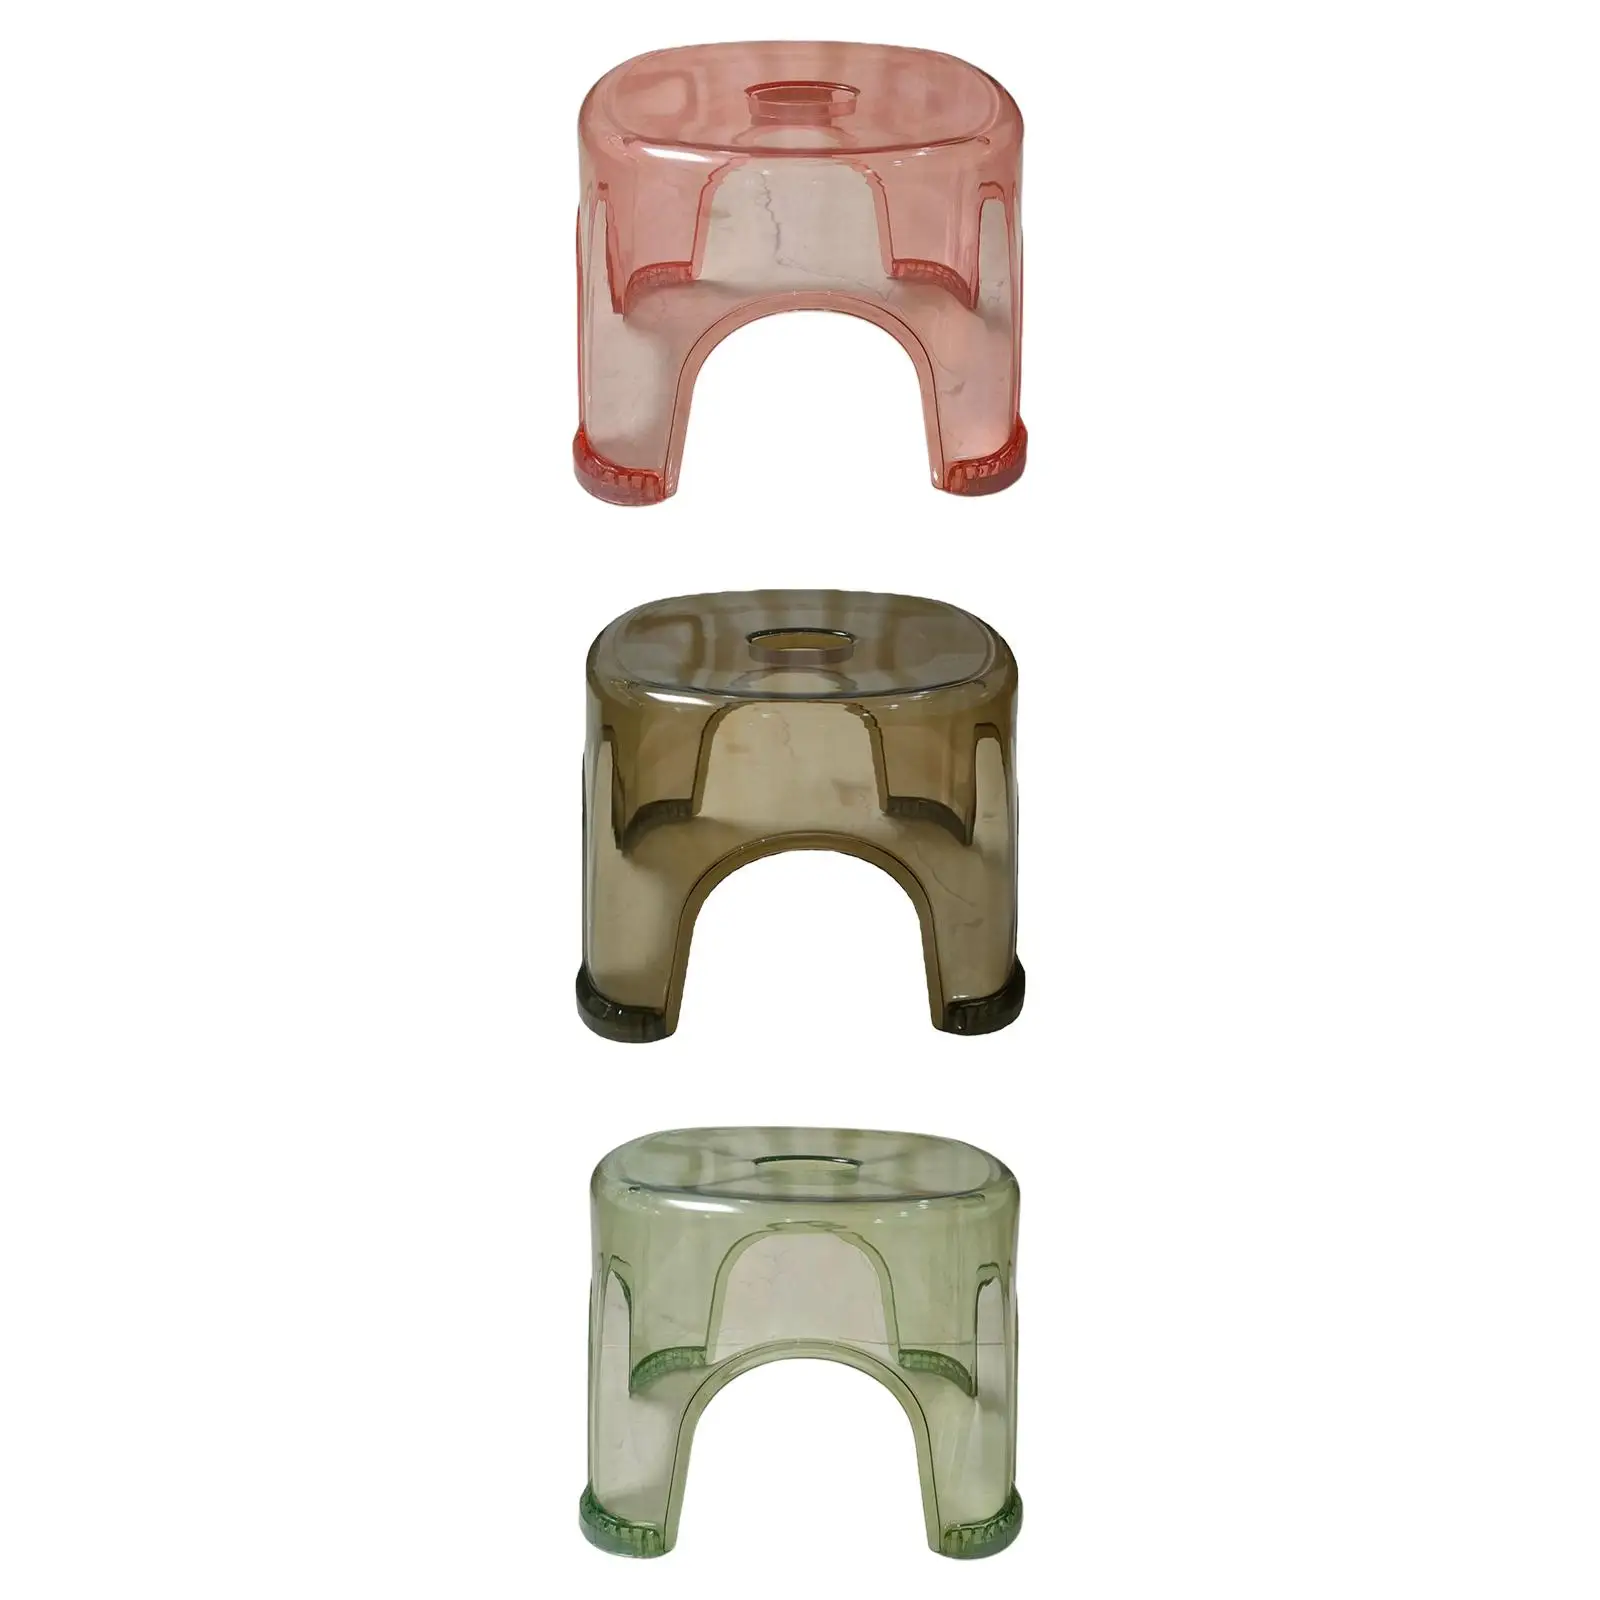 Small Stool Sturdy Lightweight Stable Step Stool Shoe Stool Potty Stool for Bedside Apartment Multi Scene Bedroom Living Room